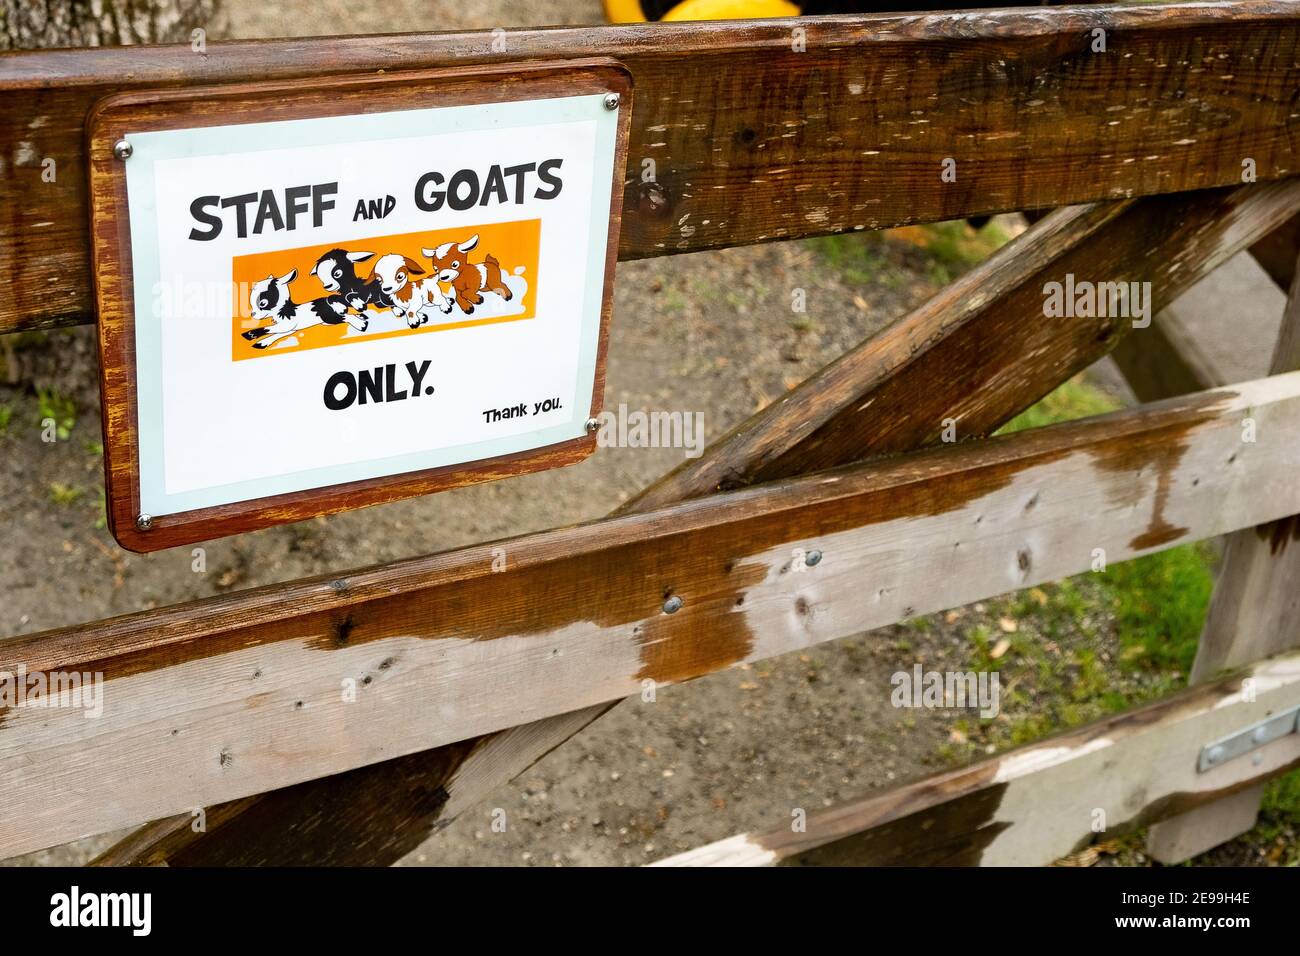 The goats of Beacon Hill park in Victoria, B.C. Canada Stock Photo